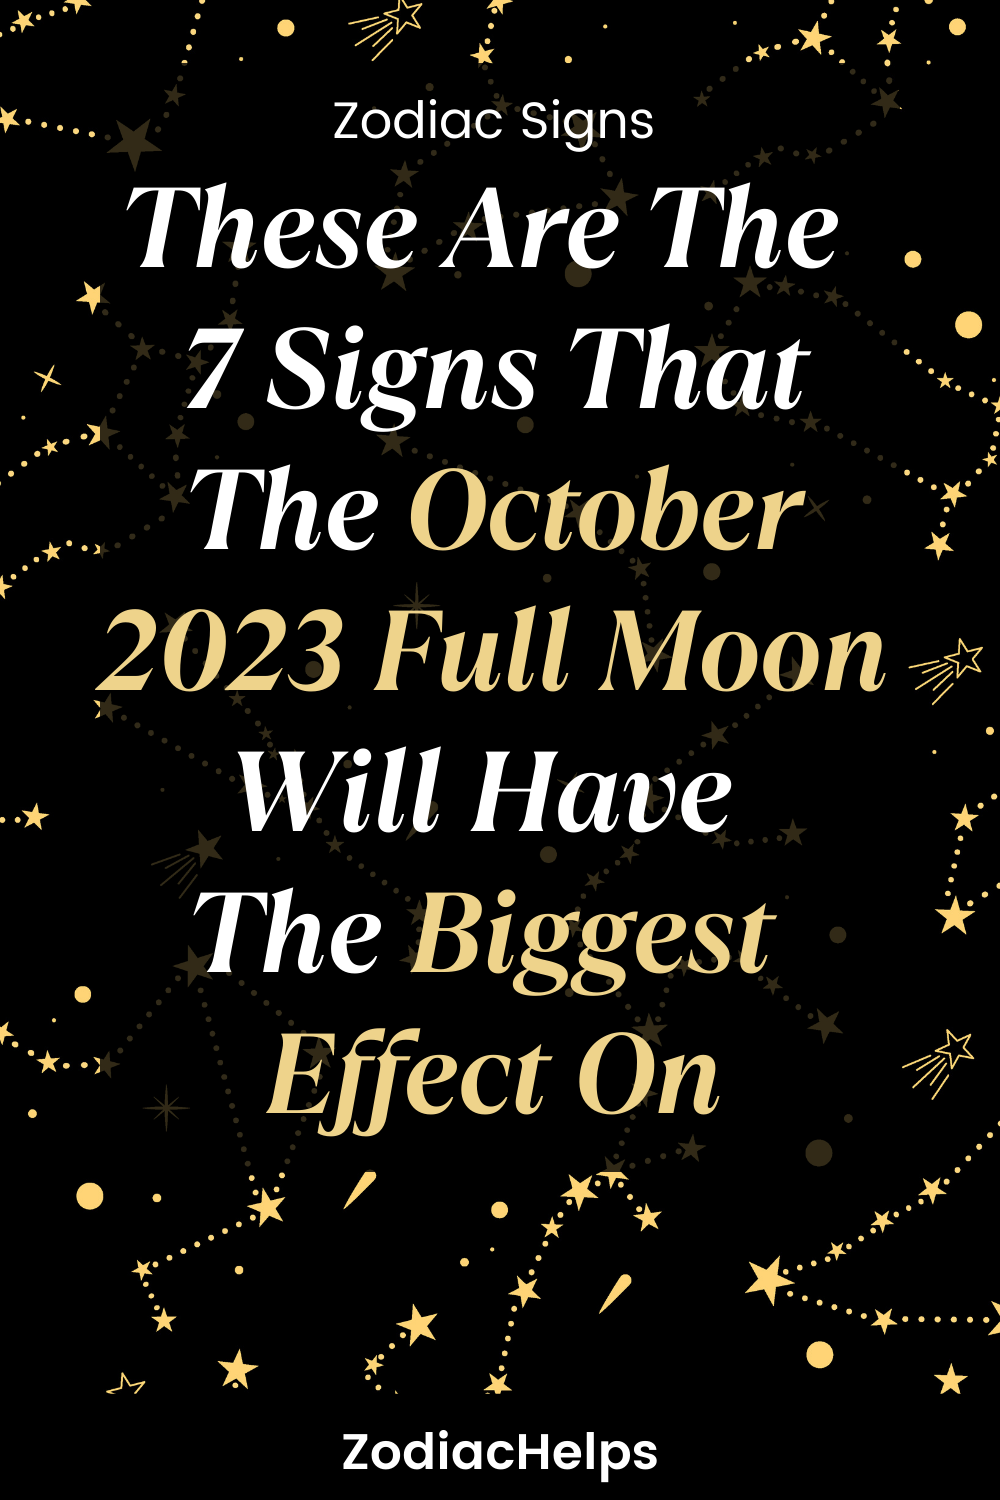 These Are The 7 Signs That The October 2023 Full Moon Will Have The Biggest Effect On